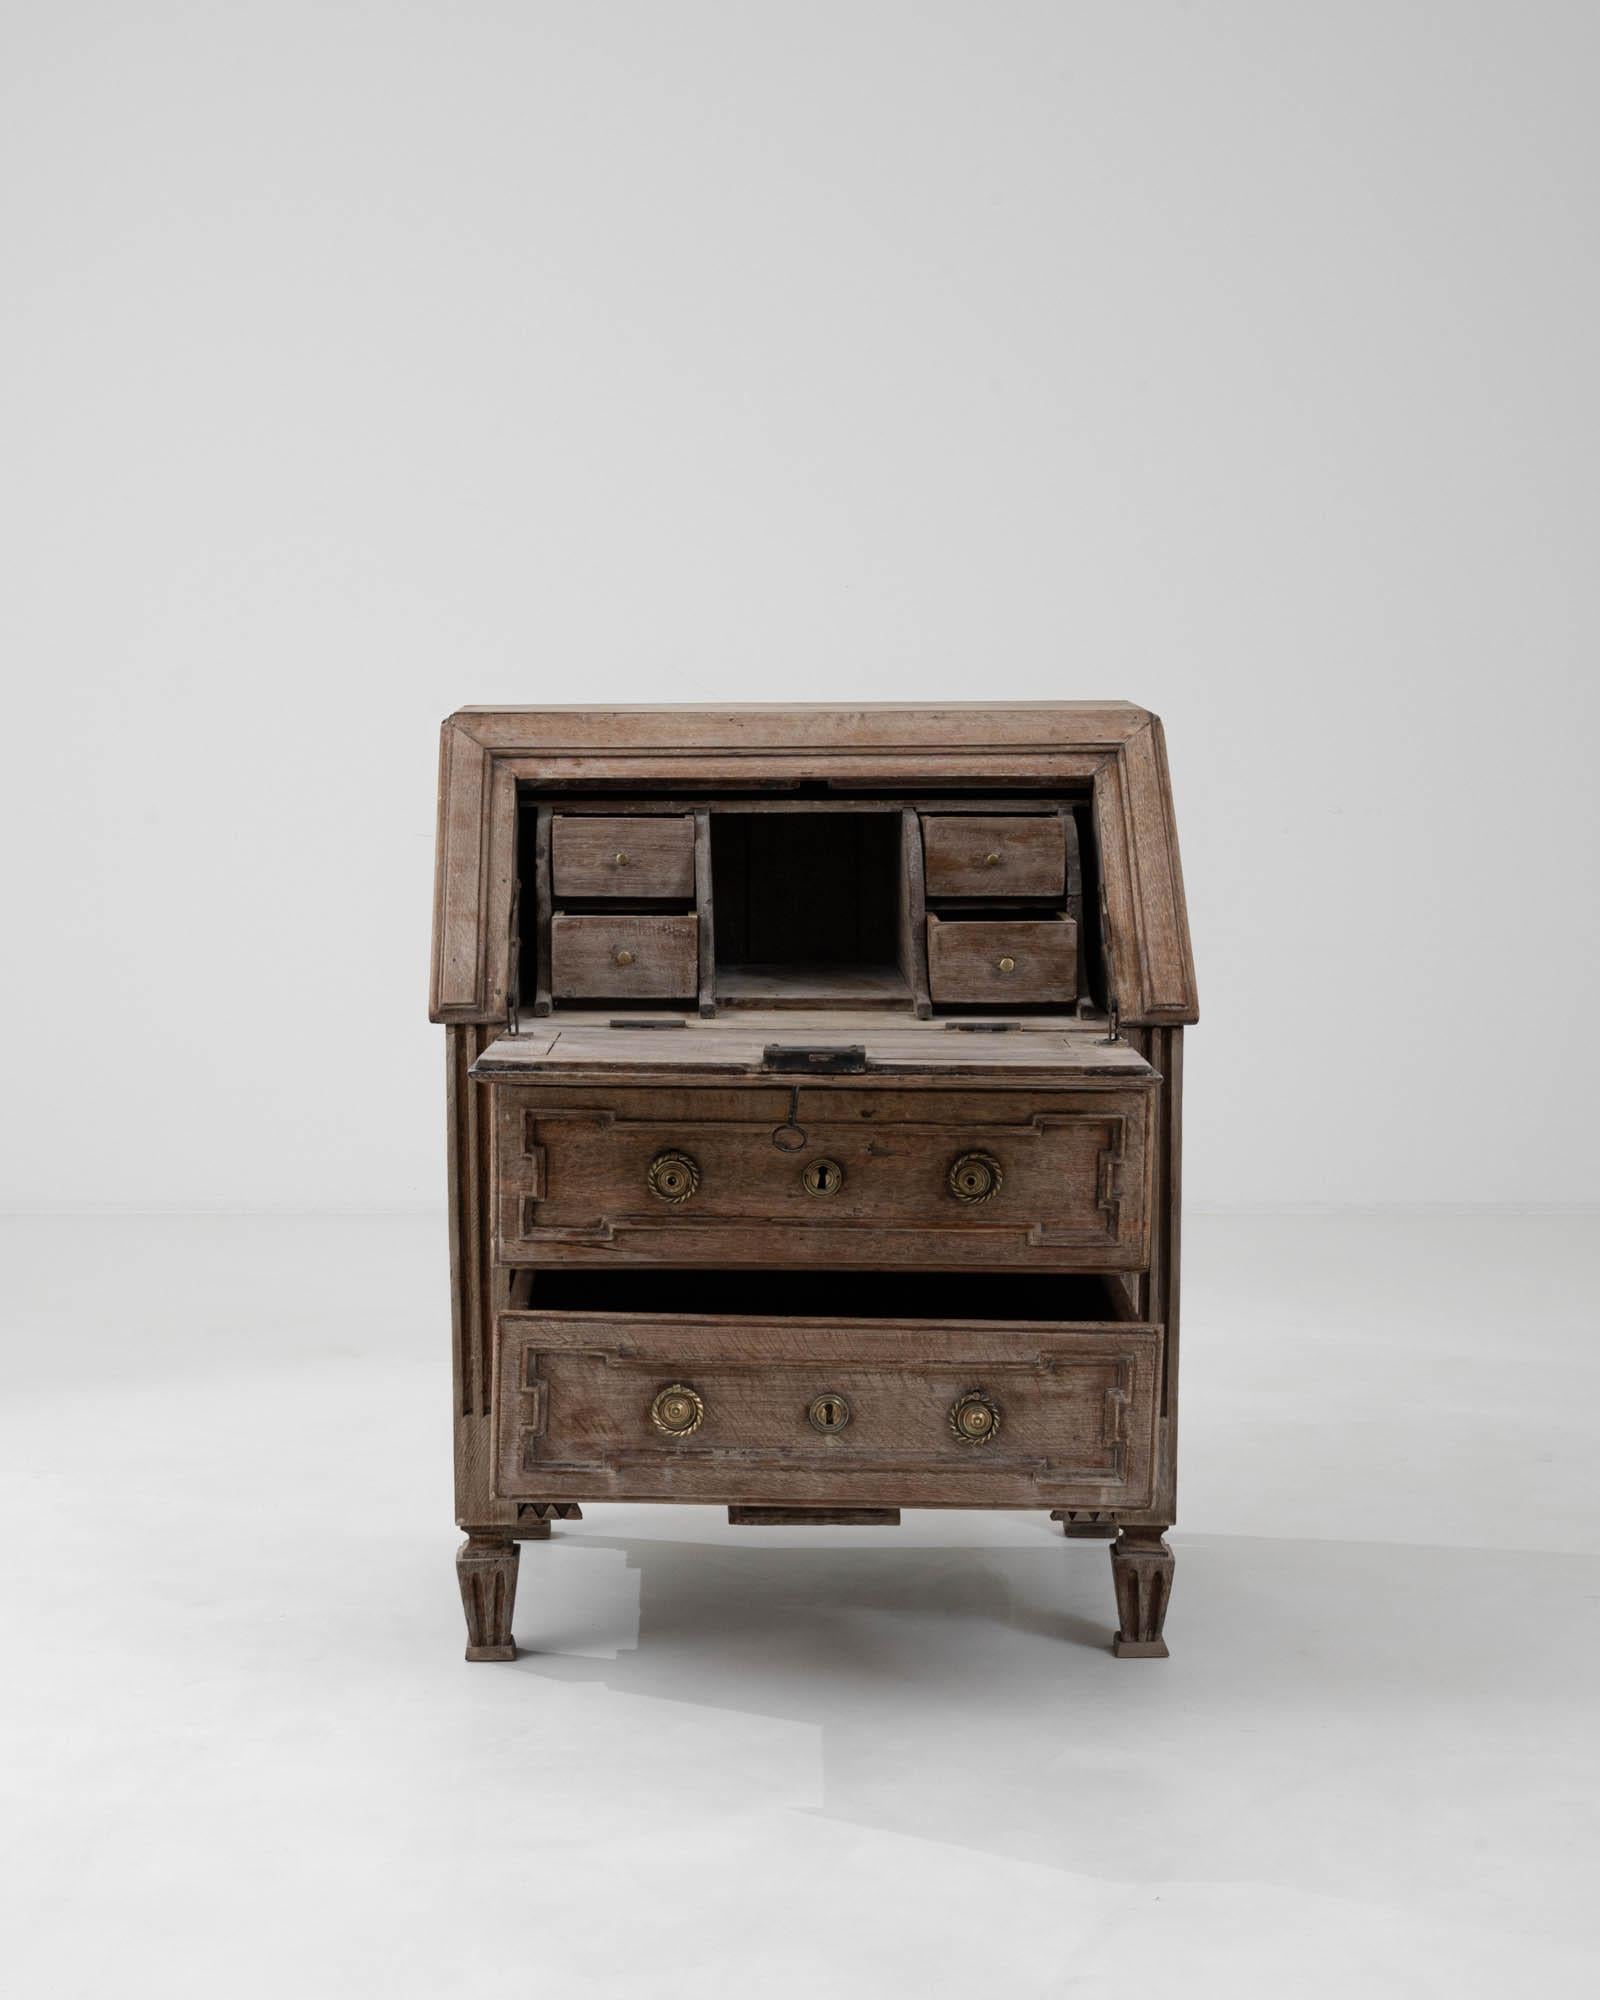 Step back in time with this exquisite 19th Century French Bleached Oak Desk, a piece that embodies the grace of antique craftsmanship. Constructed from the finest bleached oak, its patina whispers stories of a bygone era. This desk is more than just